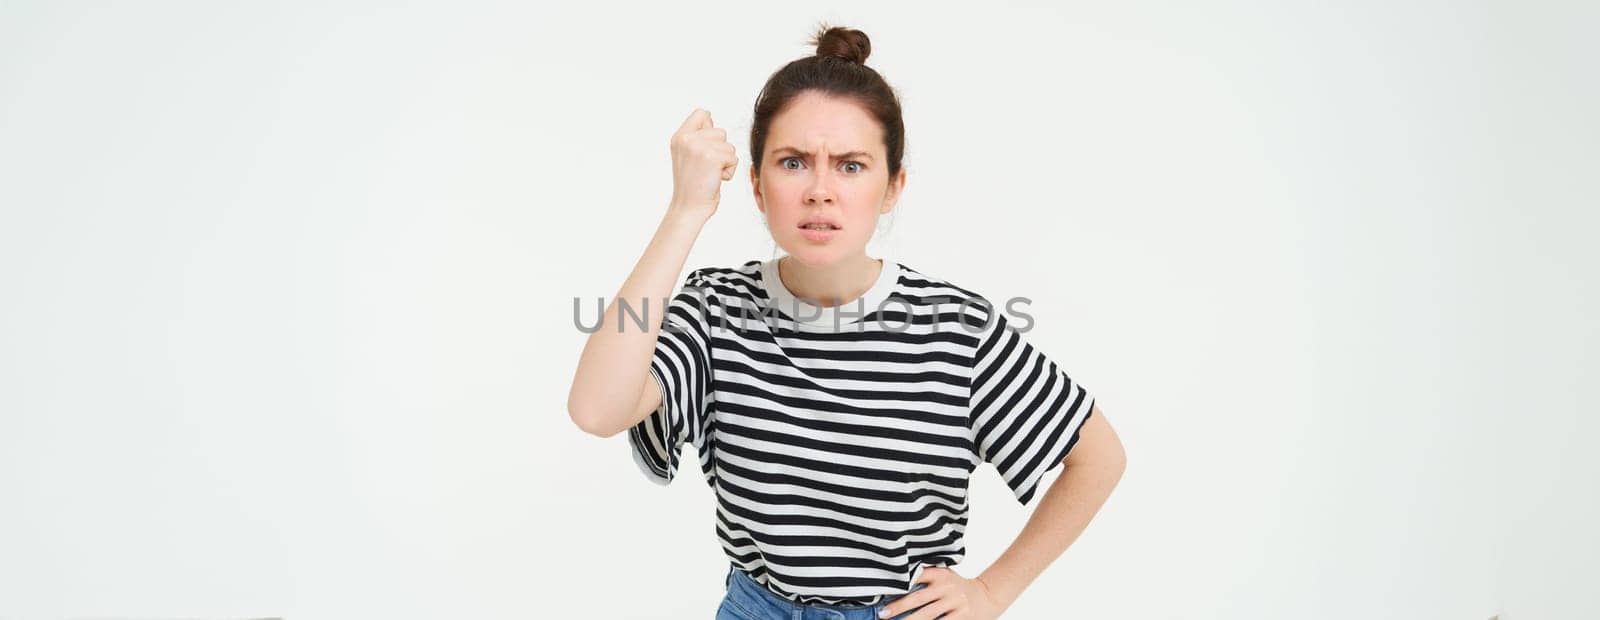 Image of angry woman threatening, shaking fist with disapproval, scolding someone, standing over white background by Benzoix